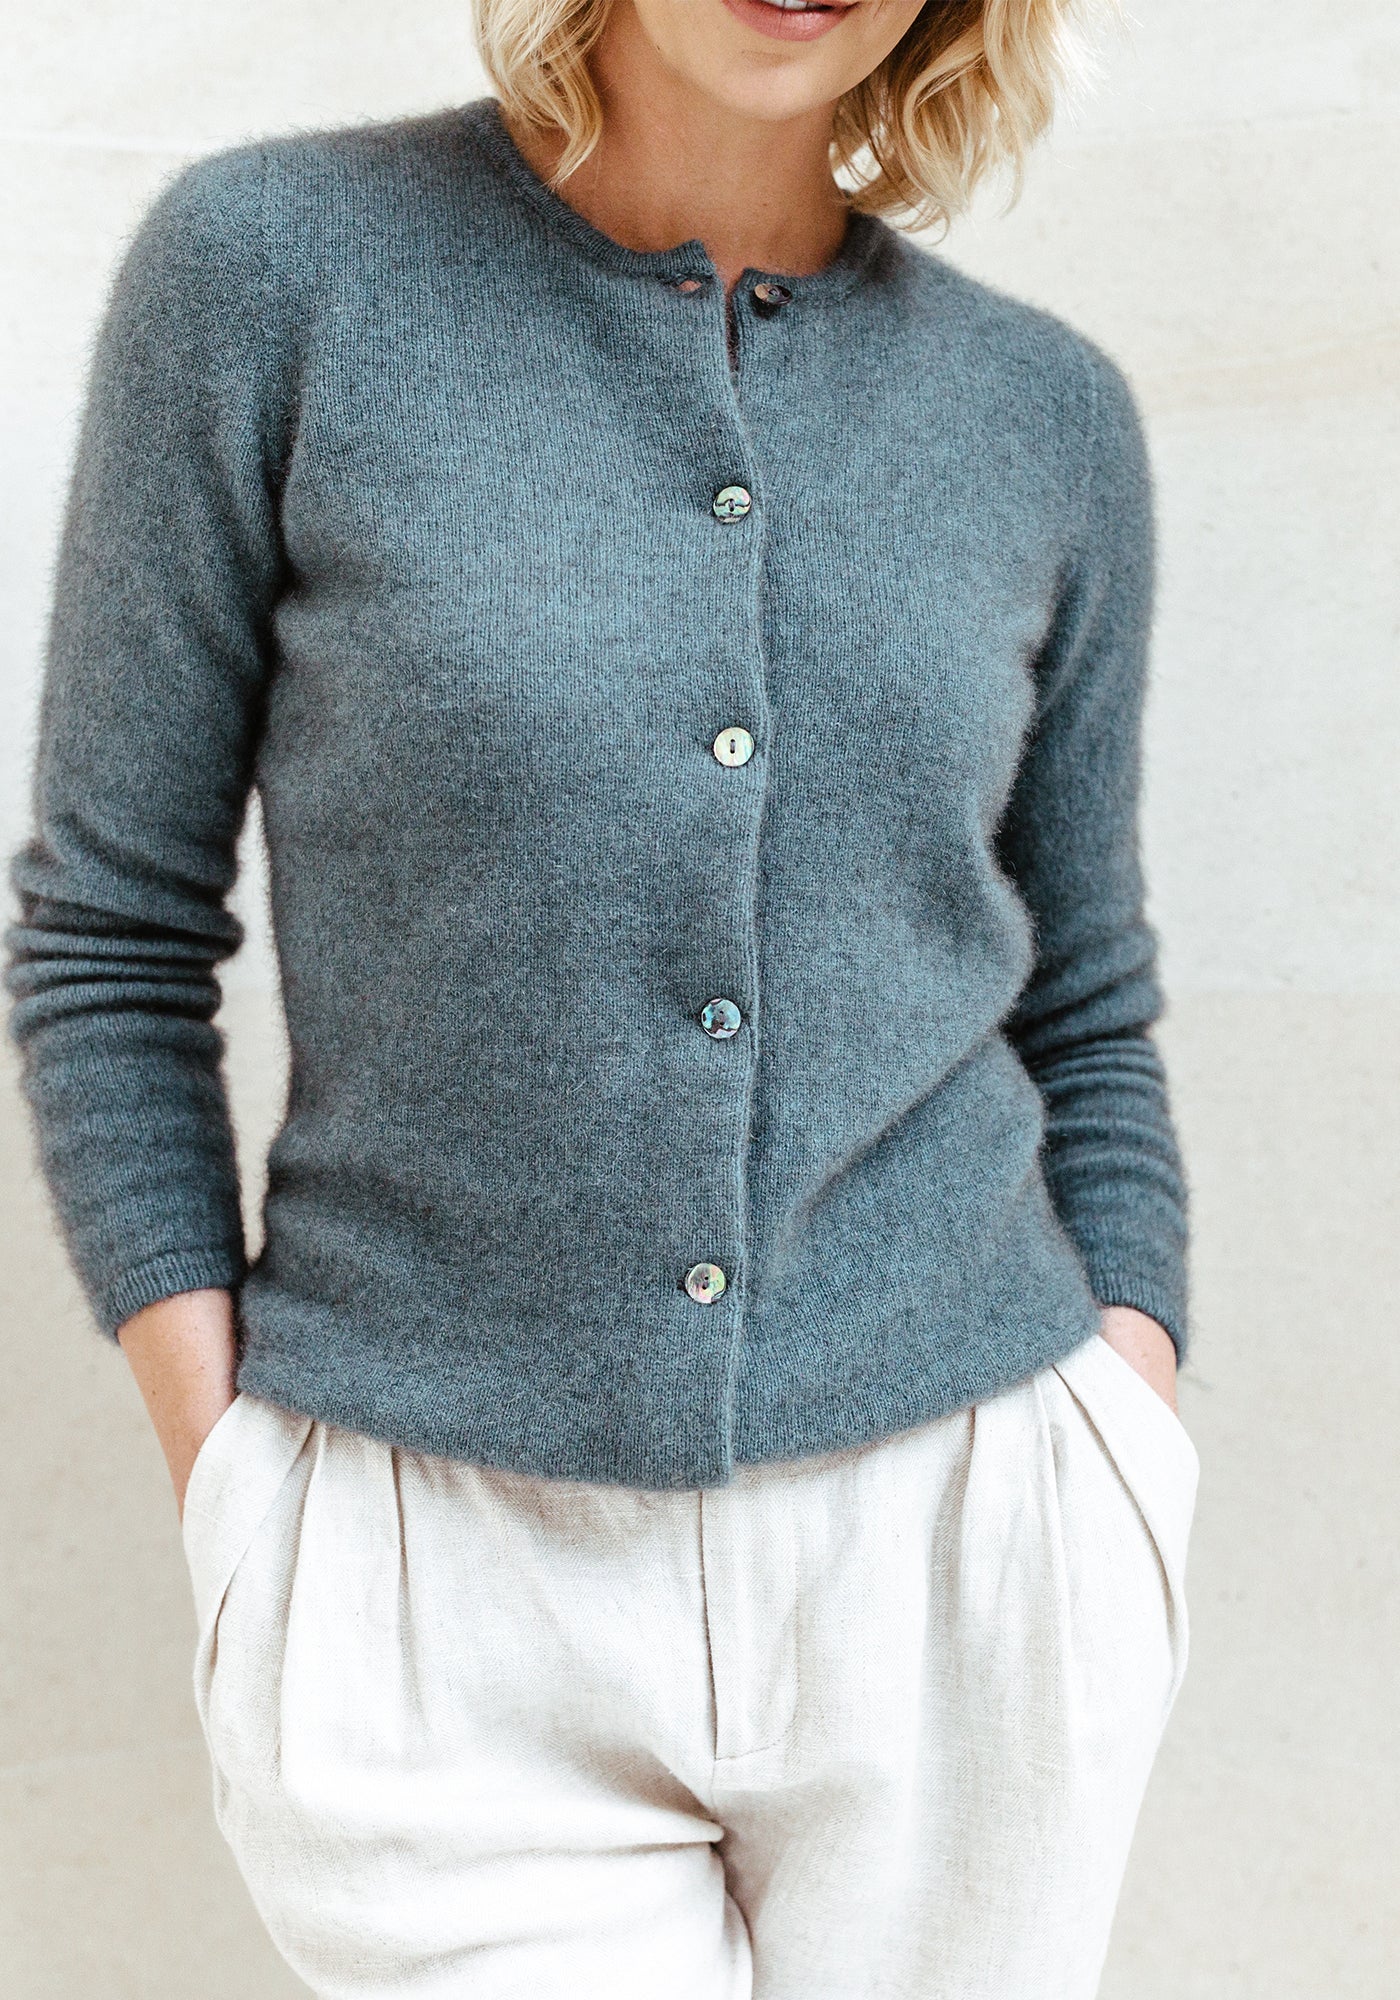 Unmatched quality: Pure Merino wool grey cardigan sweater, craftsmanship meets comfort. Shop the best now!